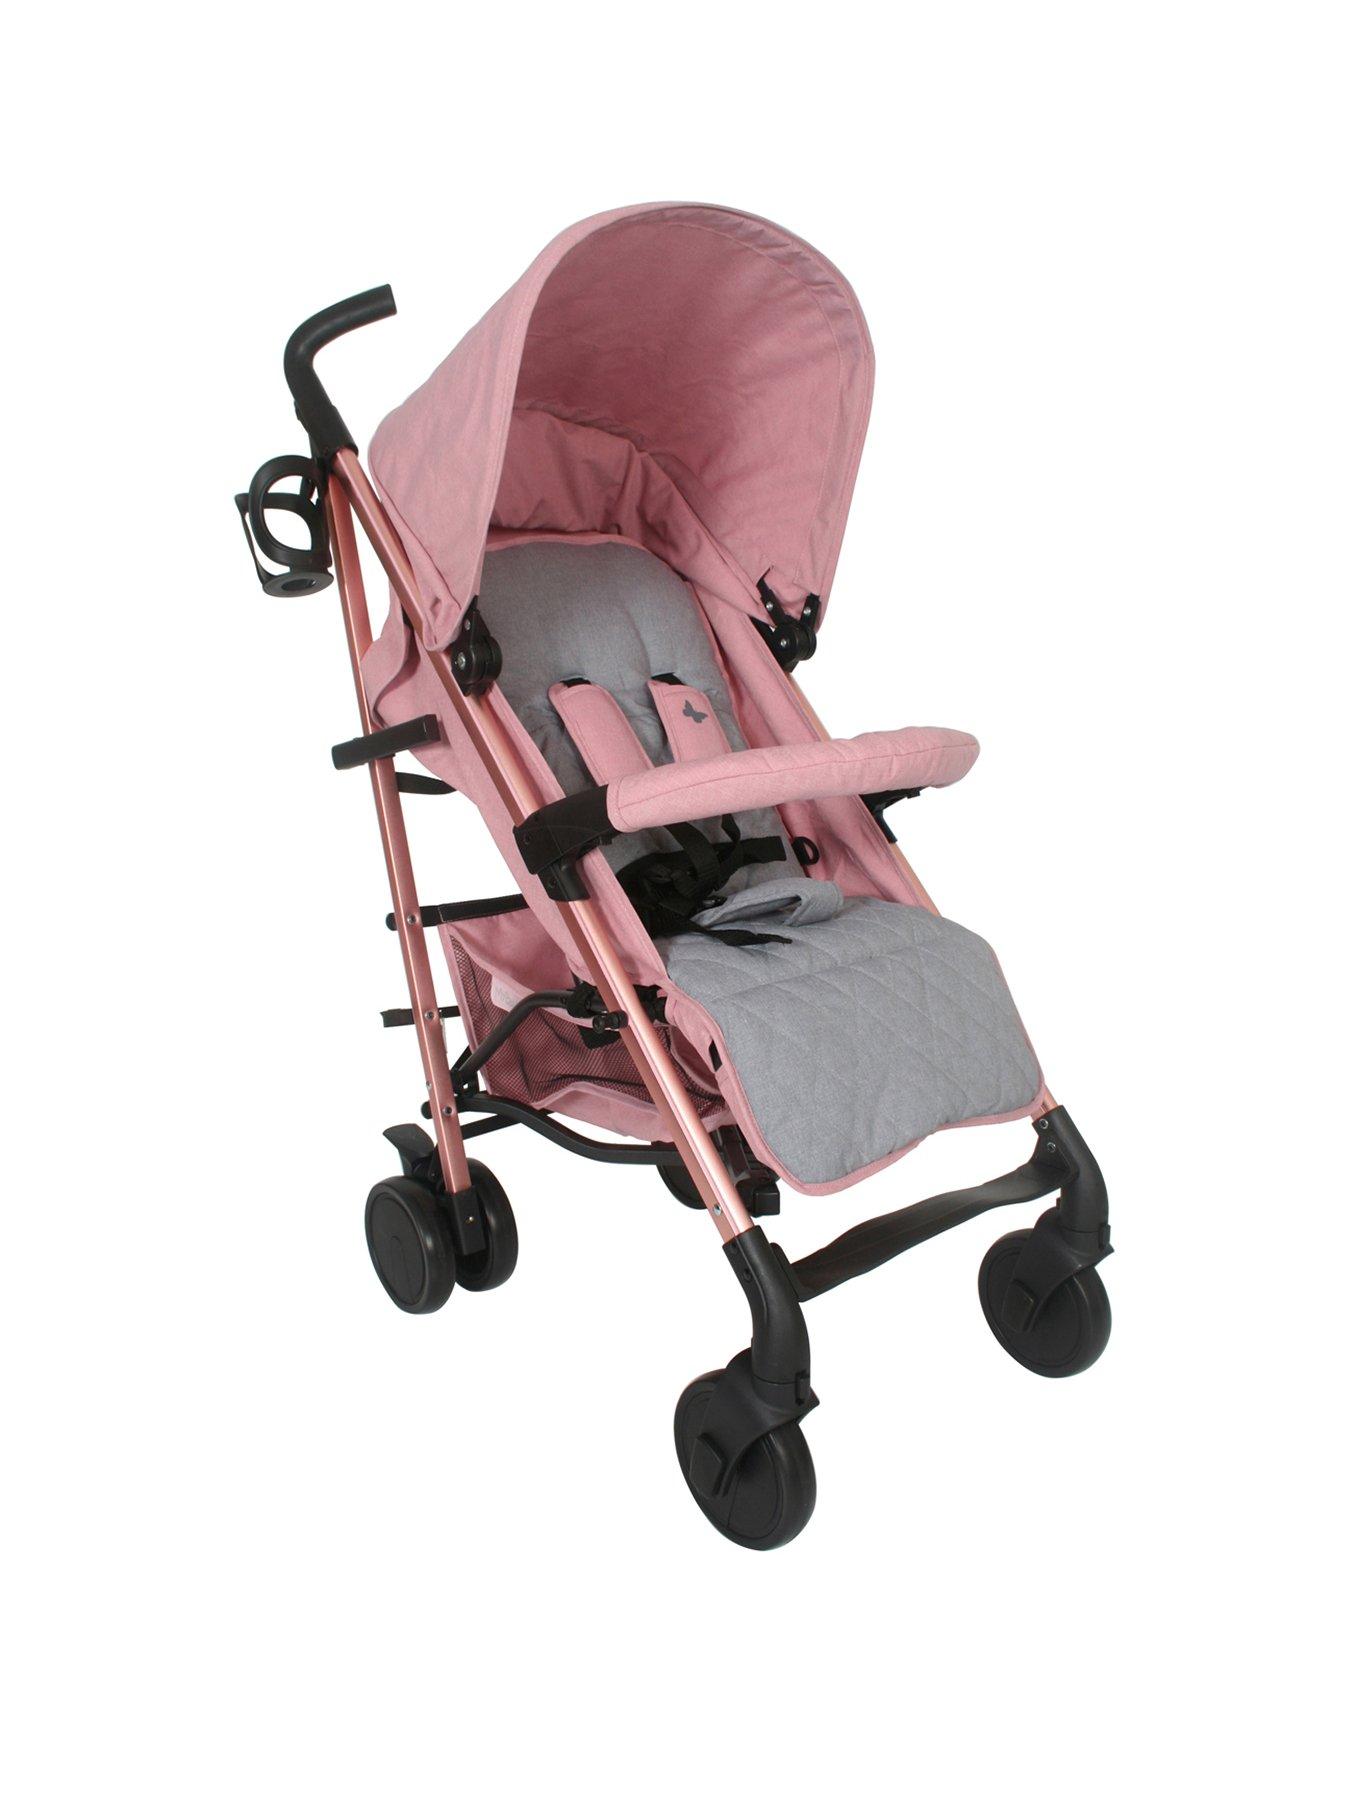 grey and pink stroller